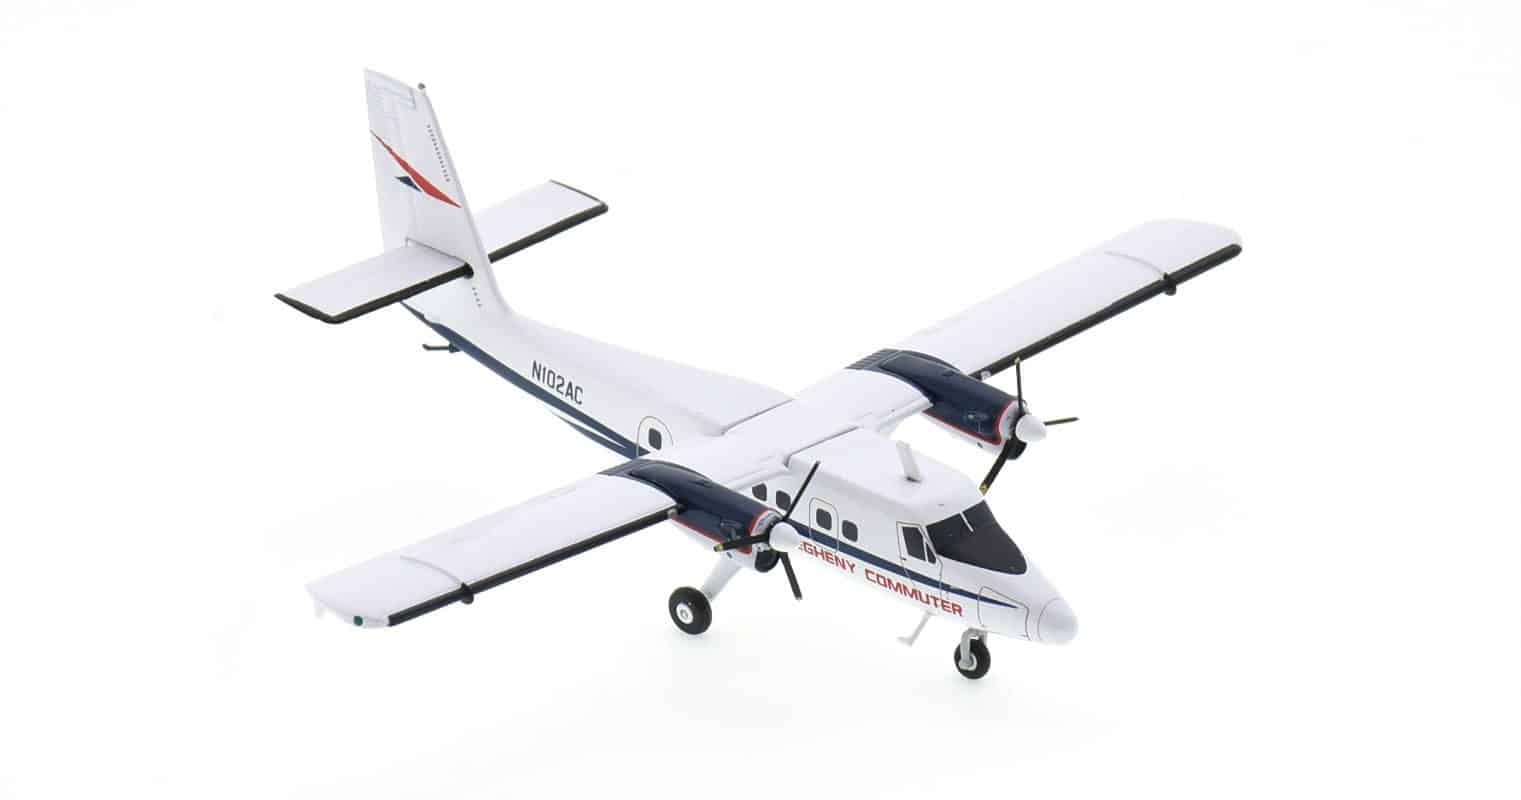 Front starboard side view of Gemini Jets G2USA1033 - 1/200 scale diecast model de Havilland Canada DHC-6-300 Twin Otter, registration N102AC in Allegheny Commuter livery, circa the early 1970s.